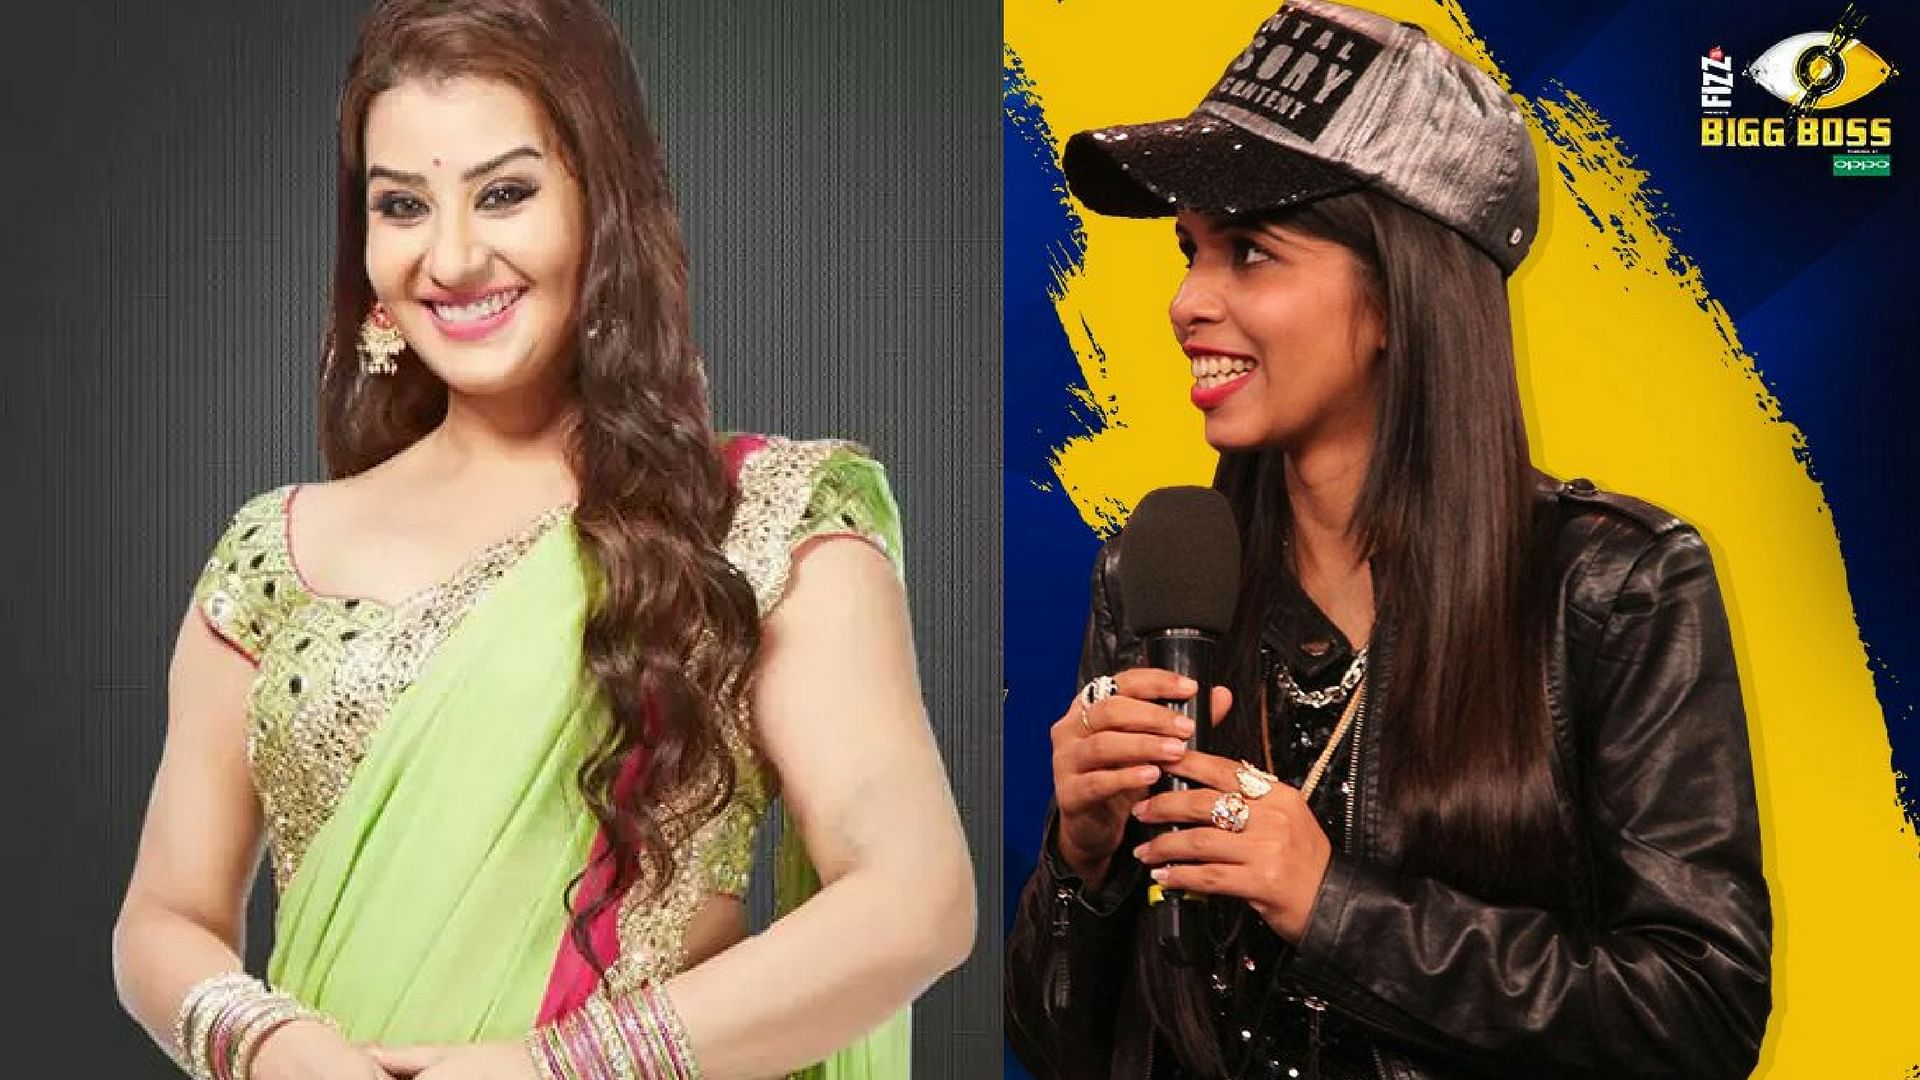 While Pooja goes home, Shilpa Shinde is safe from next week’s nominations.